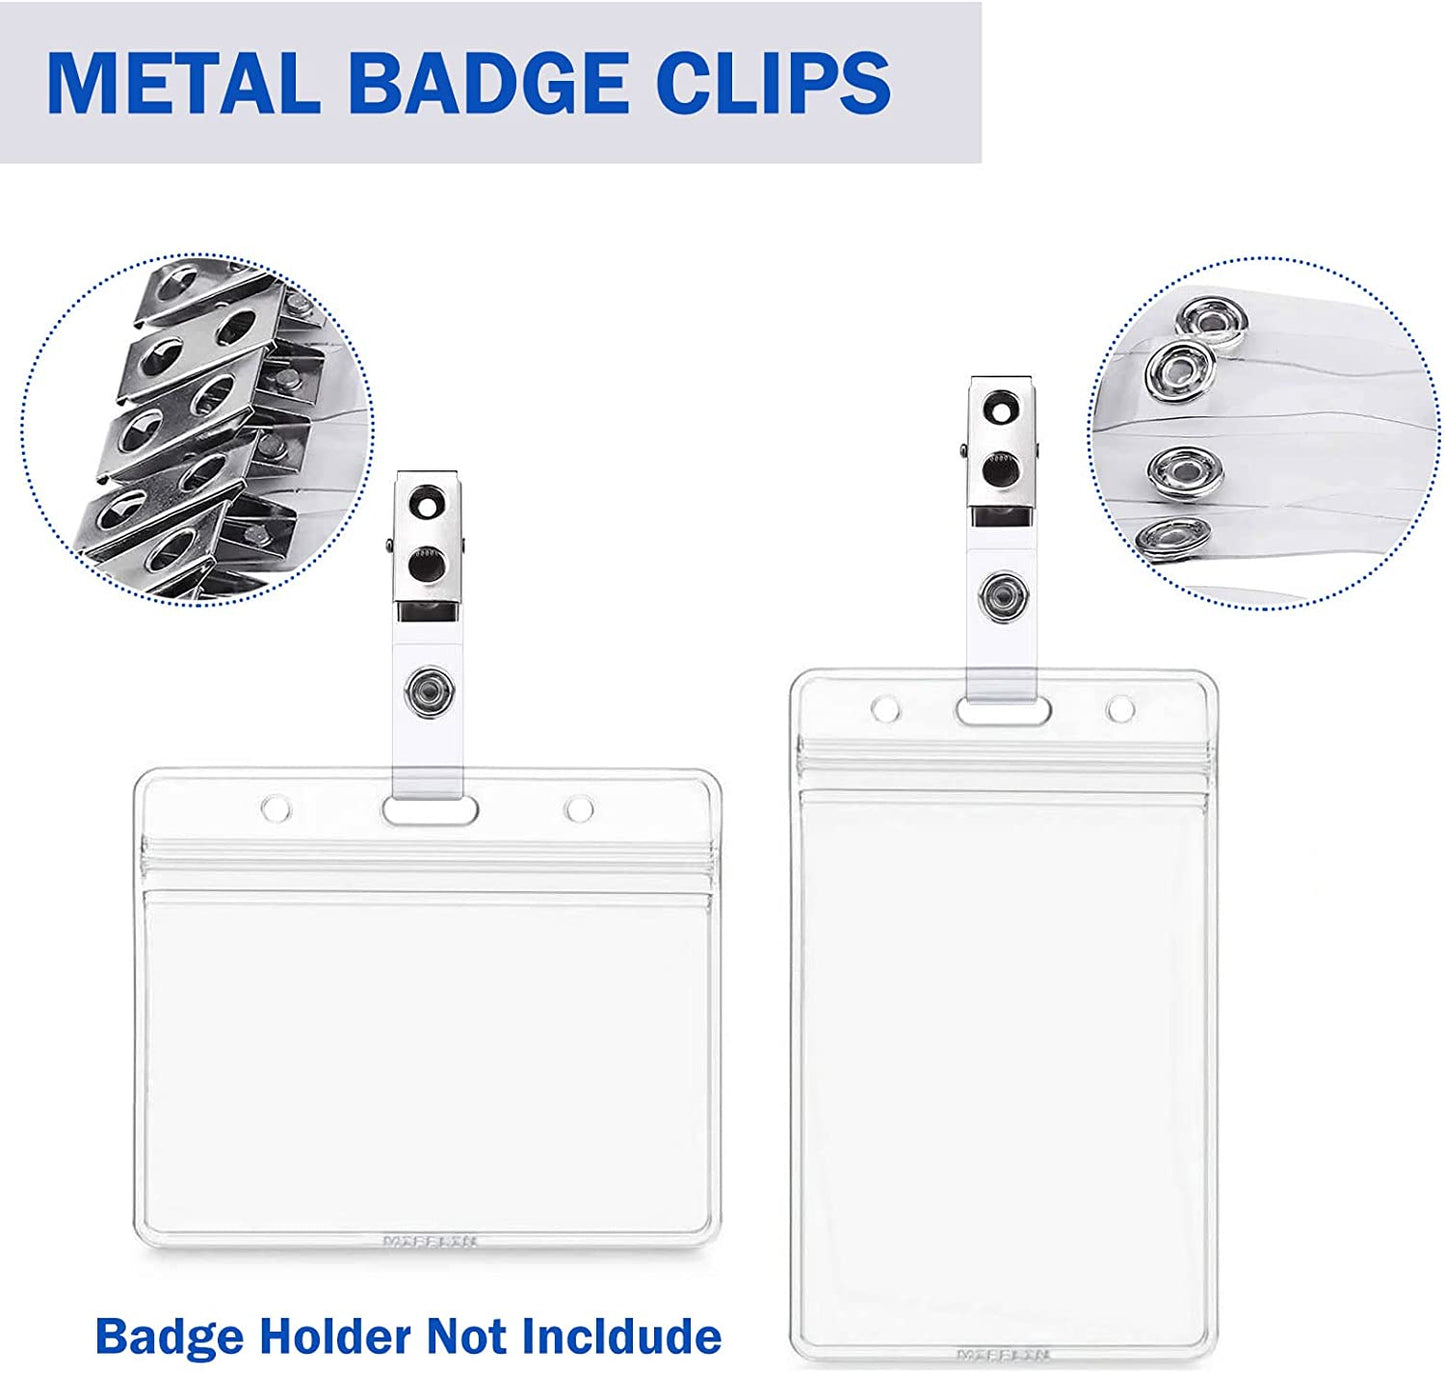 Easytle Metal Badge Clips with Clear PVC Straps ID Strap Clip ID Badge Clip Double Holes Badge Clips ID Clips for Badges Name Tag Clips Metal Clips for ID Cards Badge Holders Work Badges (30 Pcs)